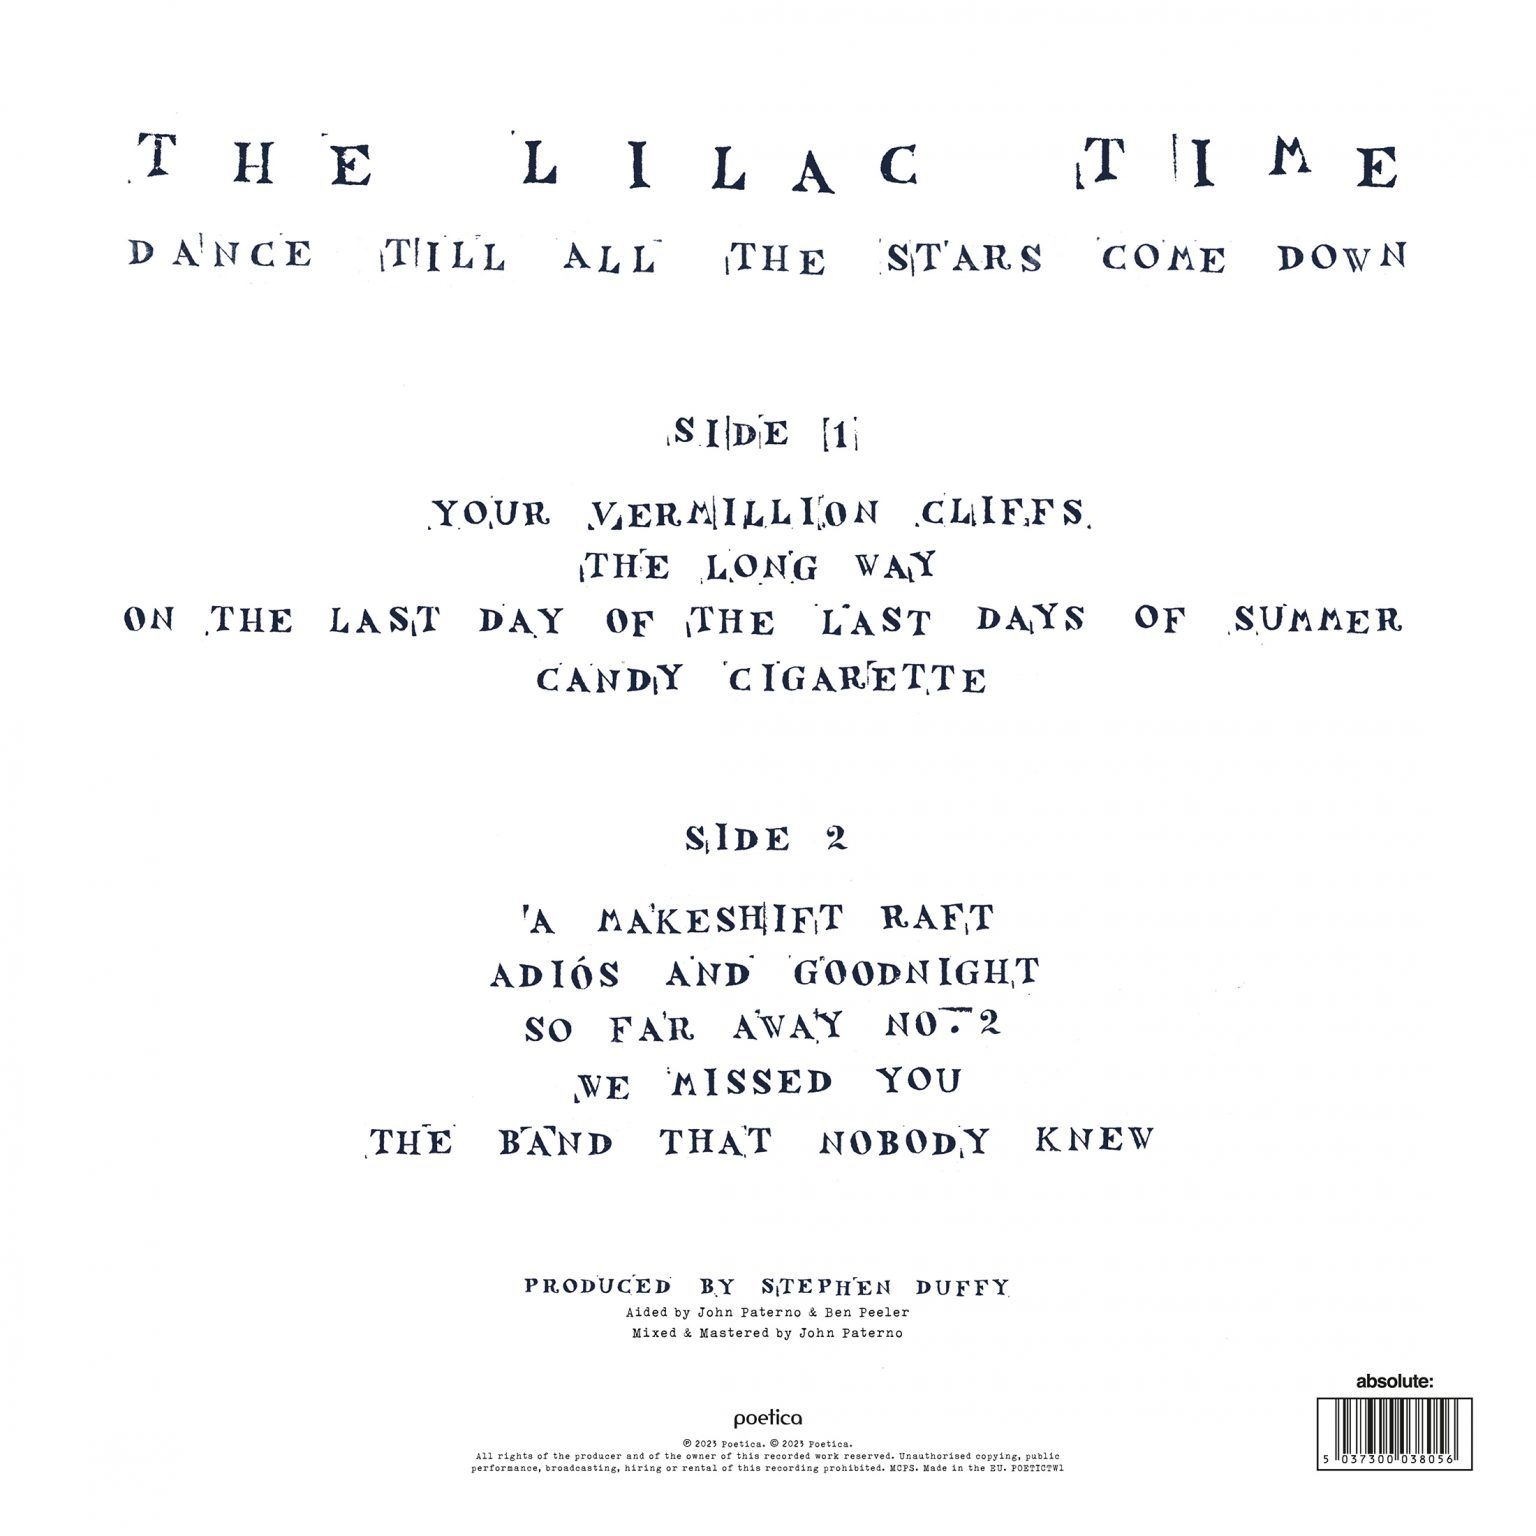 POETICTW1 The Lilac Time Dance Till LP back cover